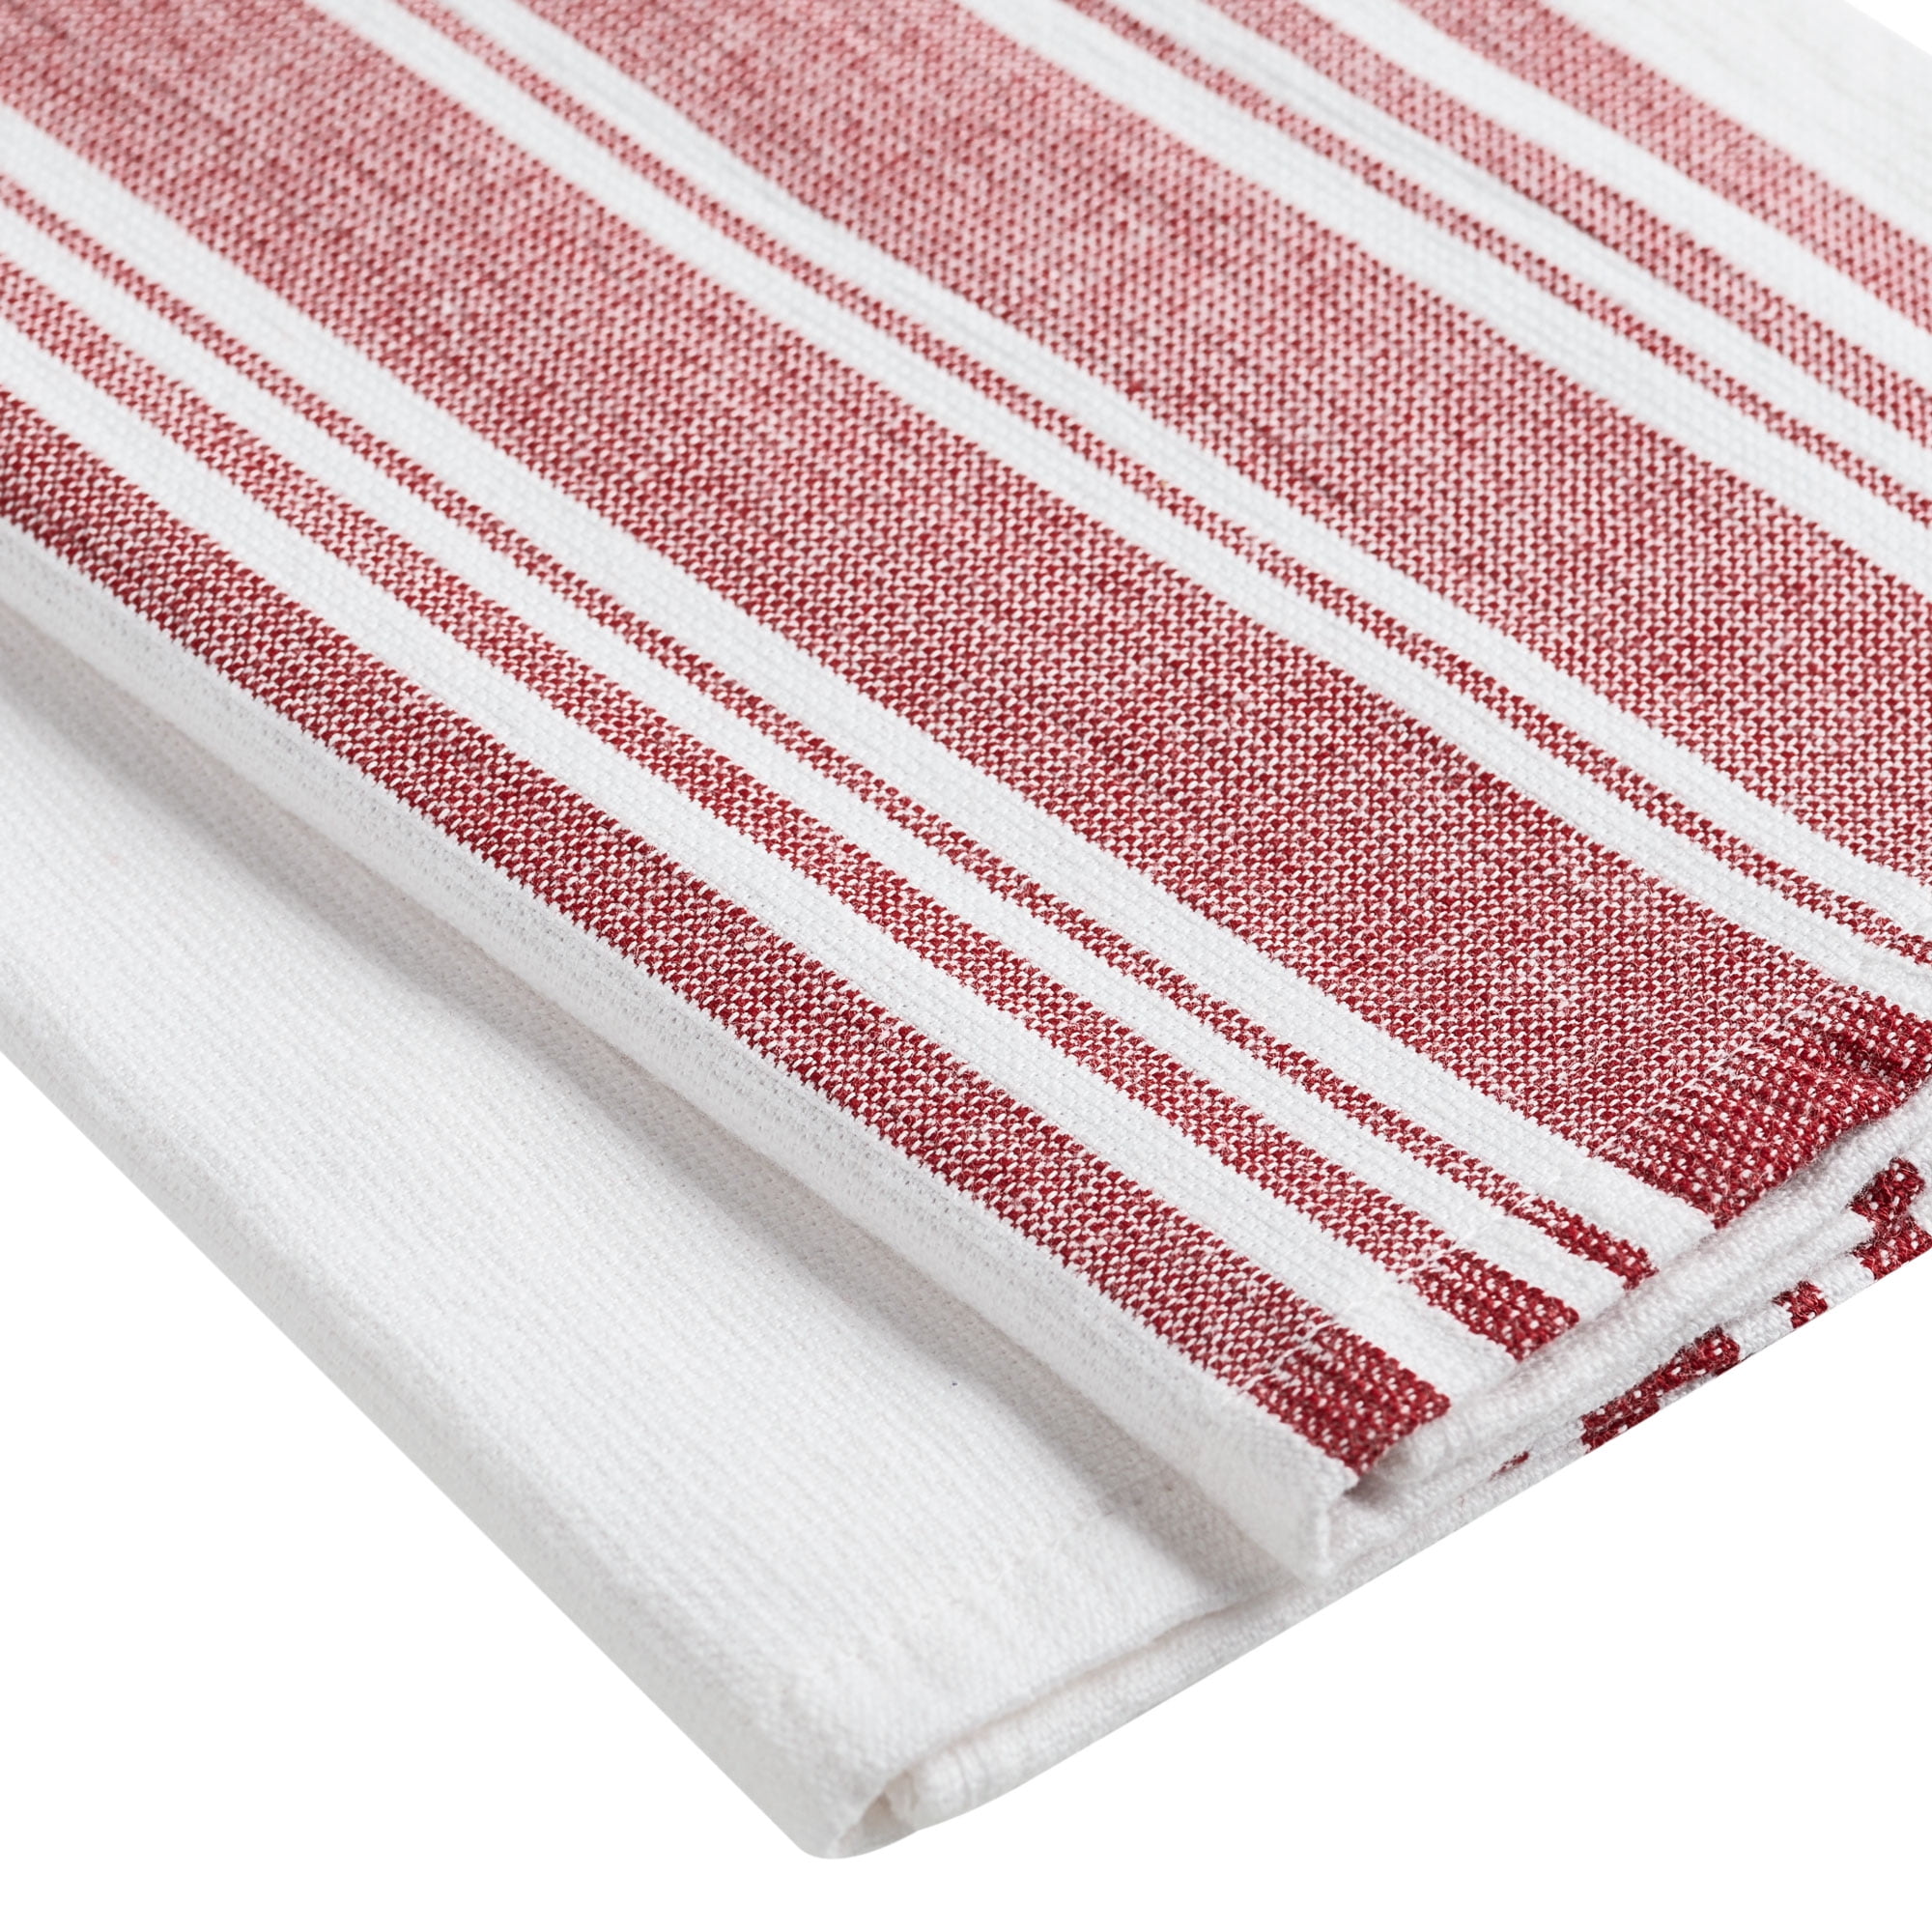 Nautica Home 100% Cotton Red 18 in. x 28 in. Kitchen Towels (3 Piece Set) -  Bed Bath & Beyond - 33746682